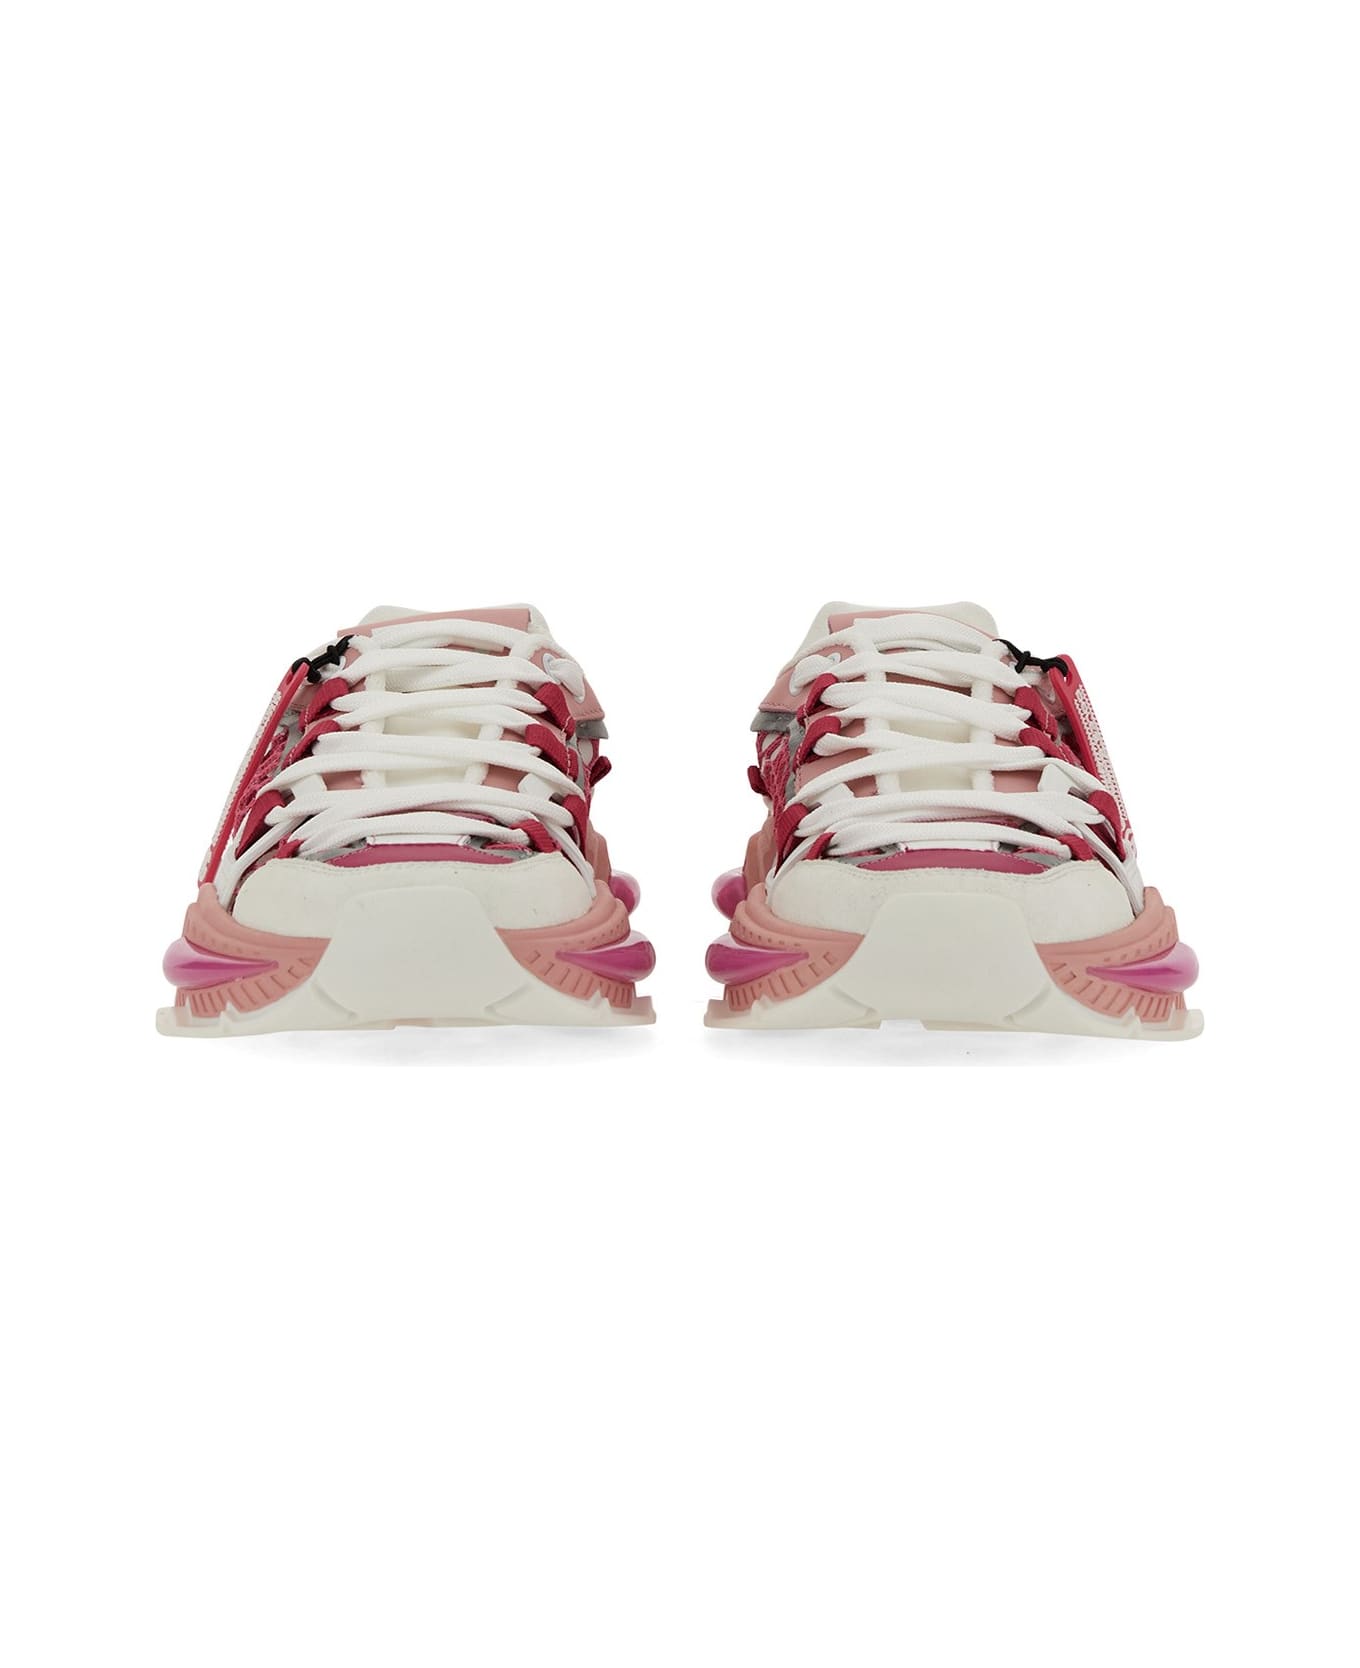 Dolce & Gabbana Airmaster Sneakers - WHITE/PINK